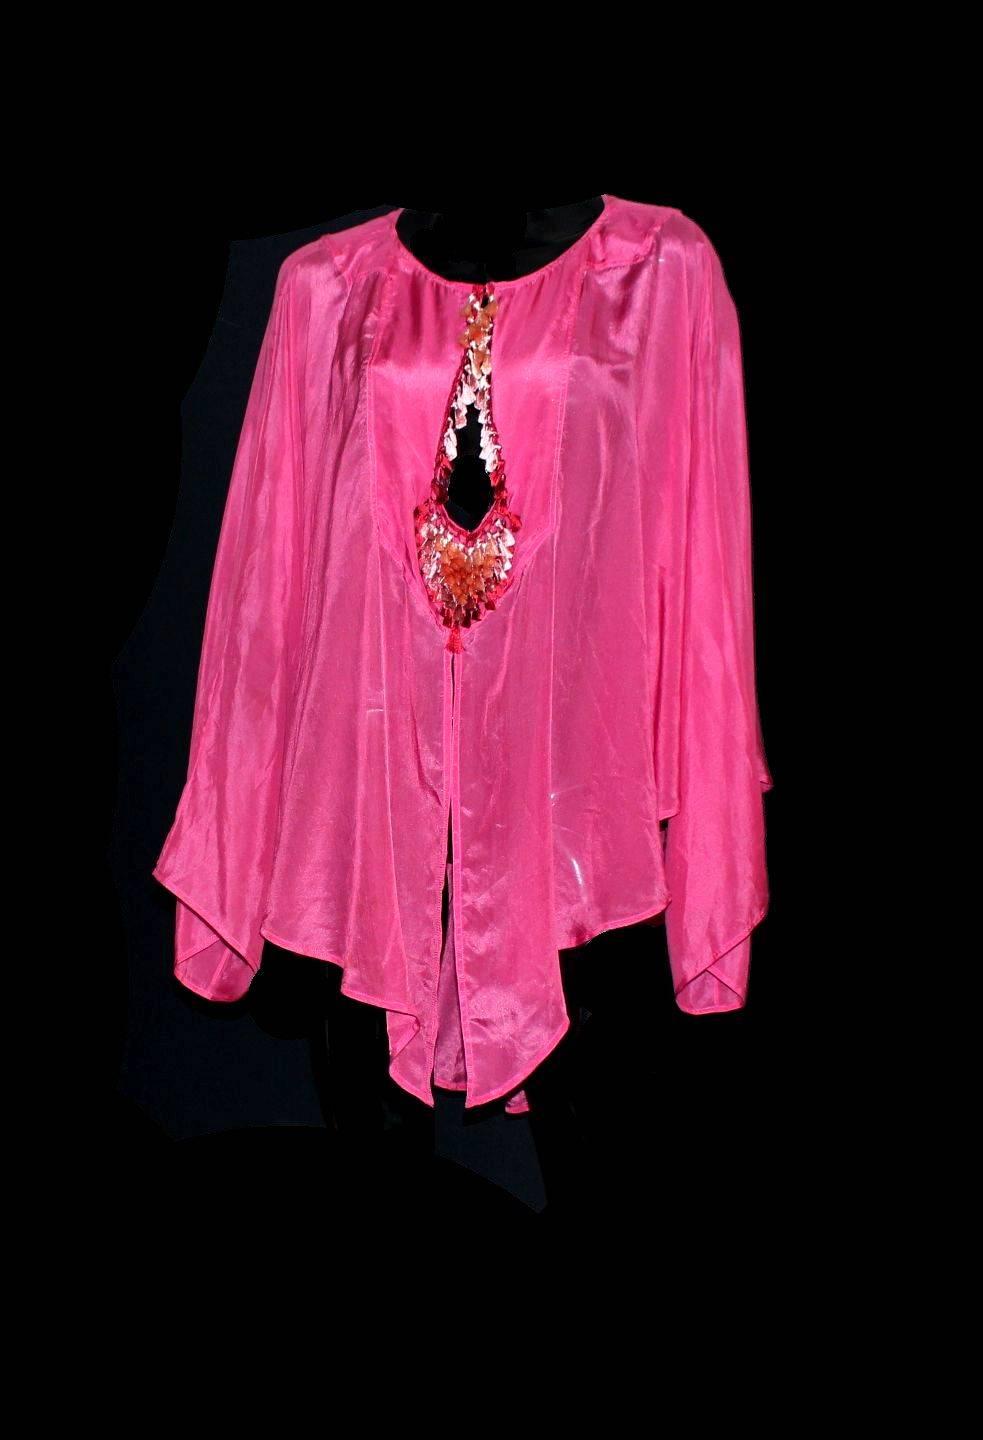 Stunning piece by Gucci
From 2004 collection
Desiged for Gucci 
Beautiful shimmering silk - colors reflecting with light
Pink color - SO Barbie!
Batwing sleeves
Gorgeous ombre tassels with macrame knitting
Peekaboo cutout details
Cleavage can be